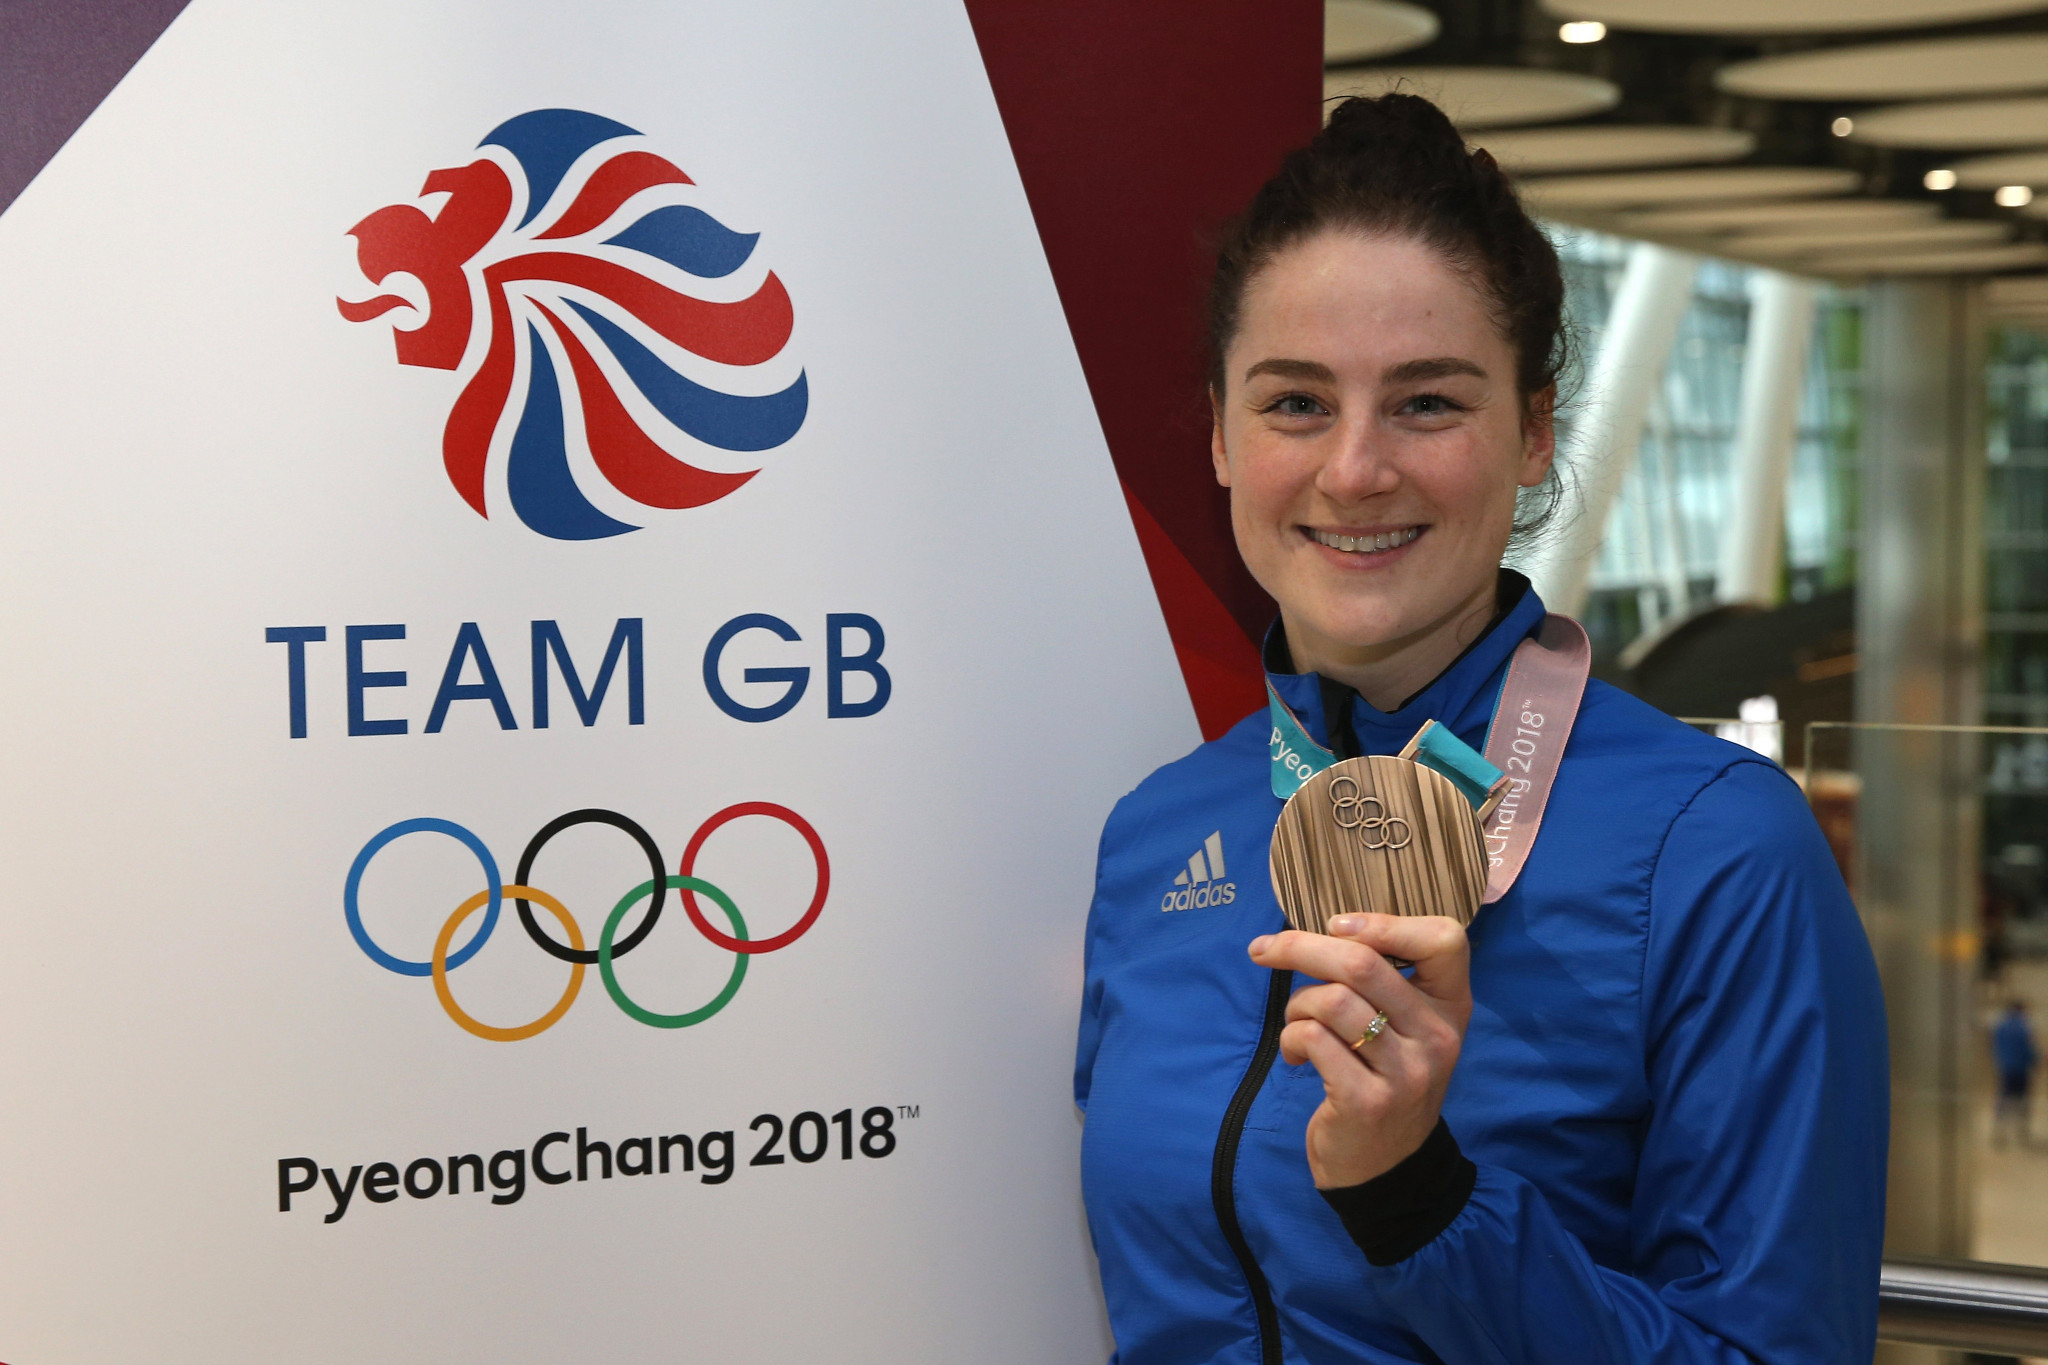 Laura Deas won a bronze medal at her debut Olympics, the 2018 Pyeongchang Winter Games ©Getty Images